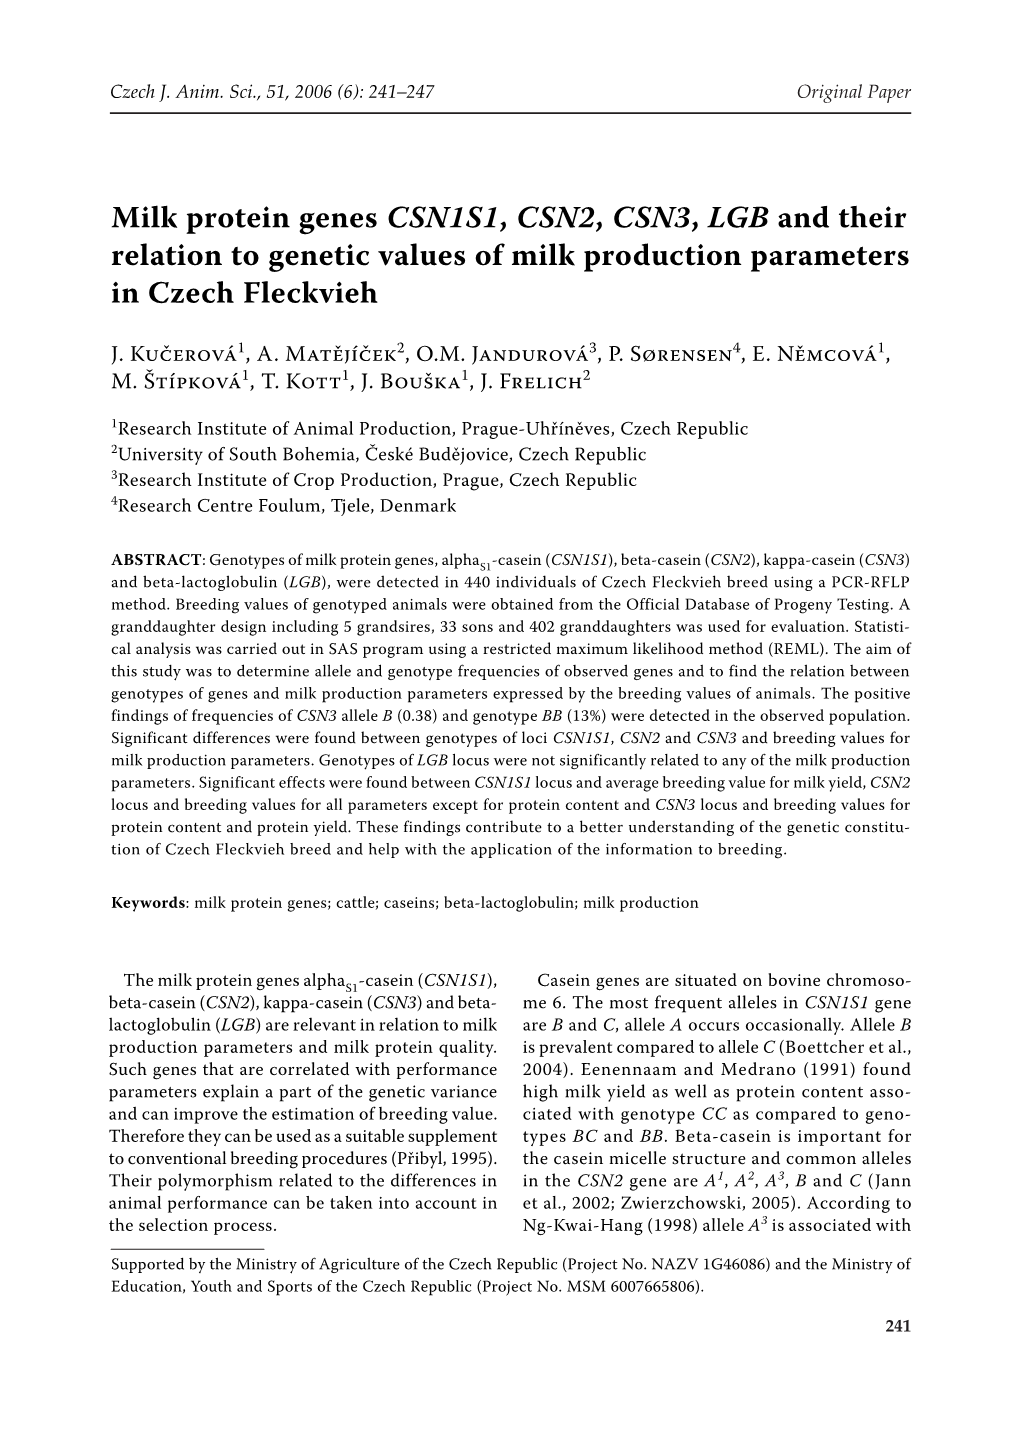 Milk Protein Genes CSN1S1, CSN2, CSN3, LGB and Their Relation to Genetic Values of Milk Production Parameters in Czech Fleckvieh